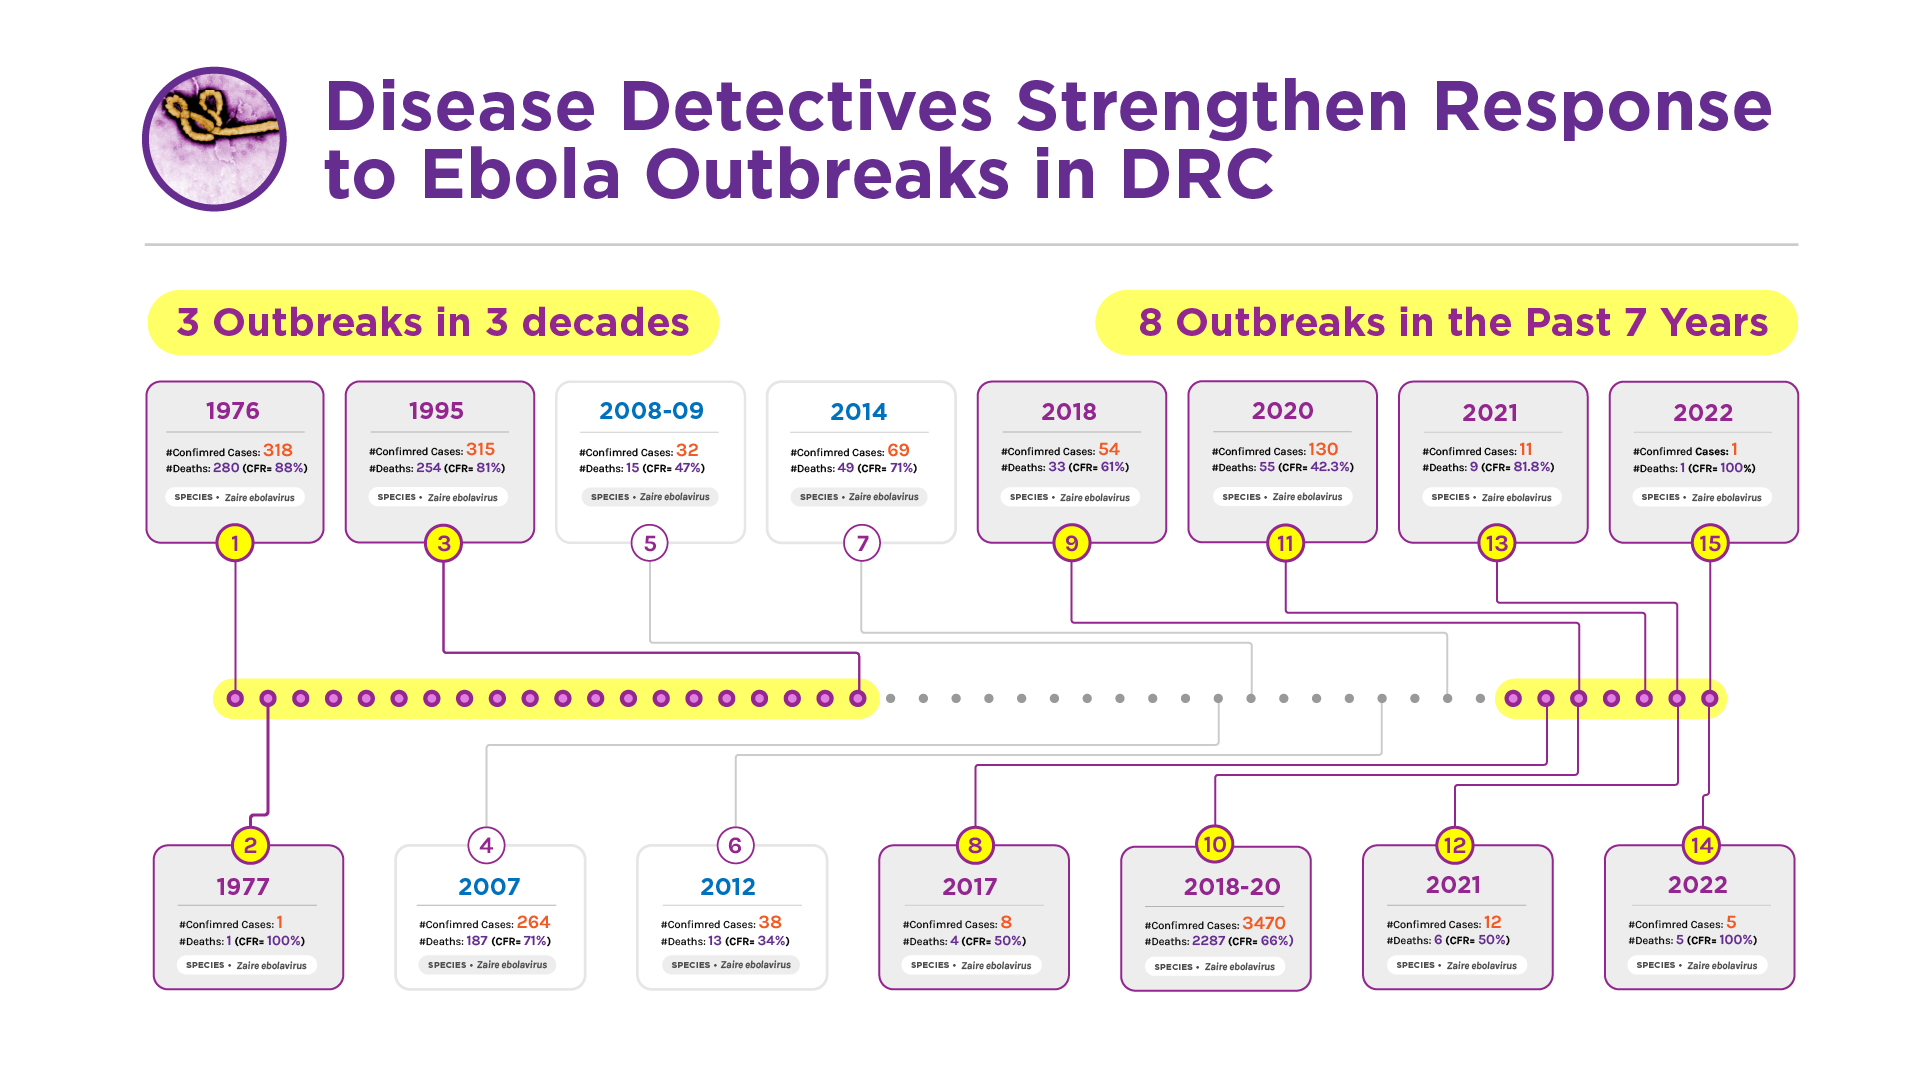 History of Ebola Outbreaks in DRC